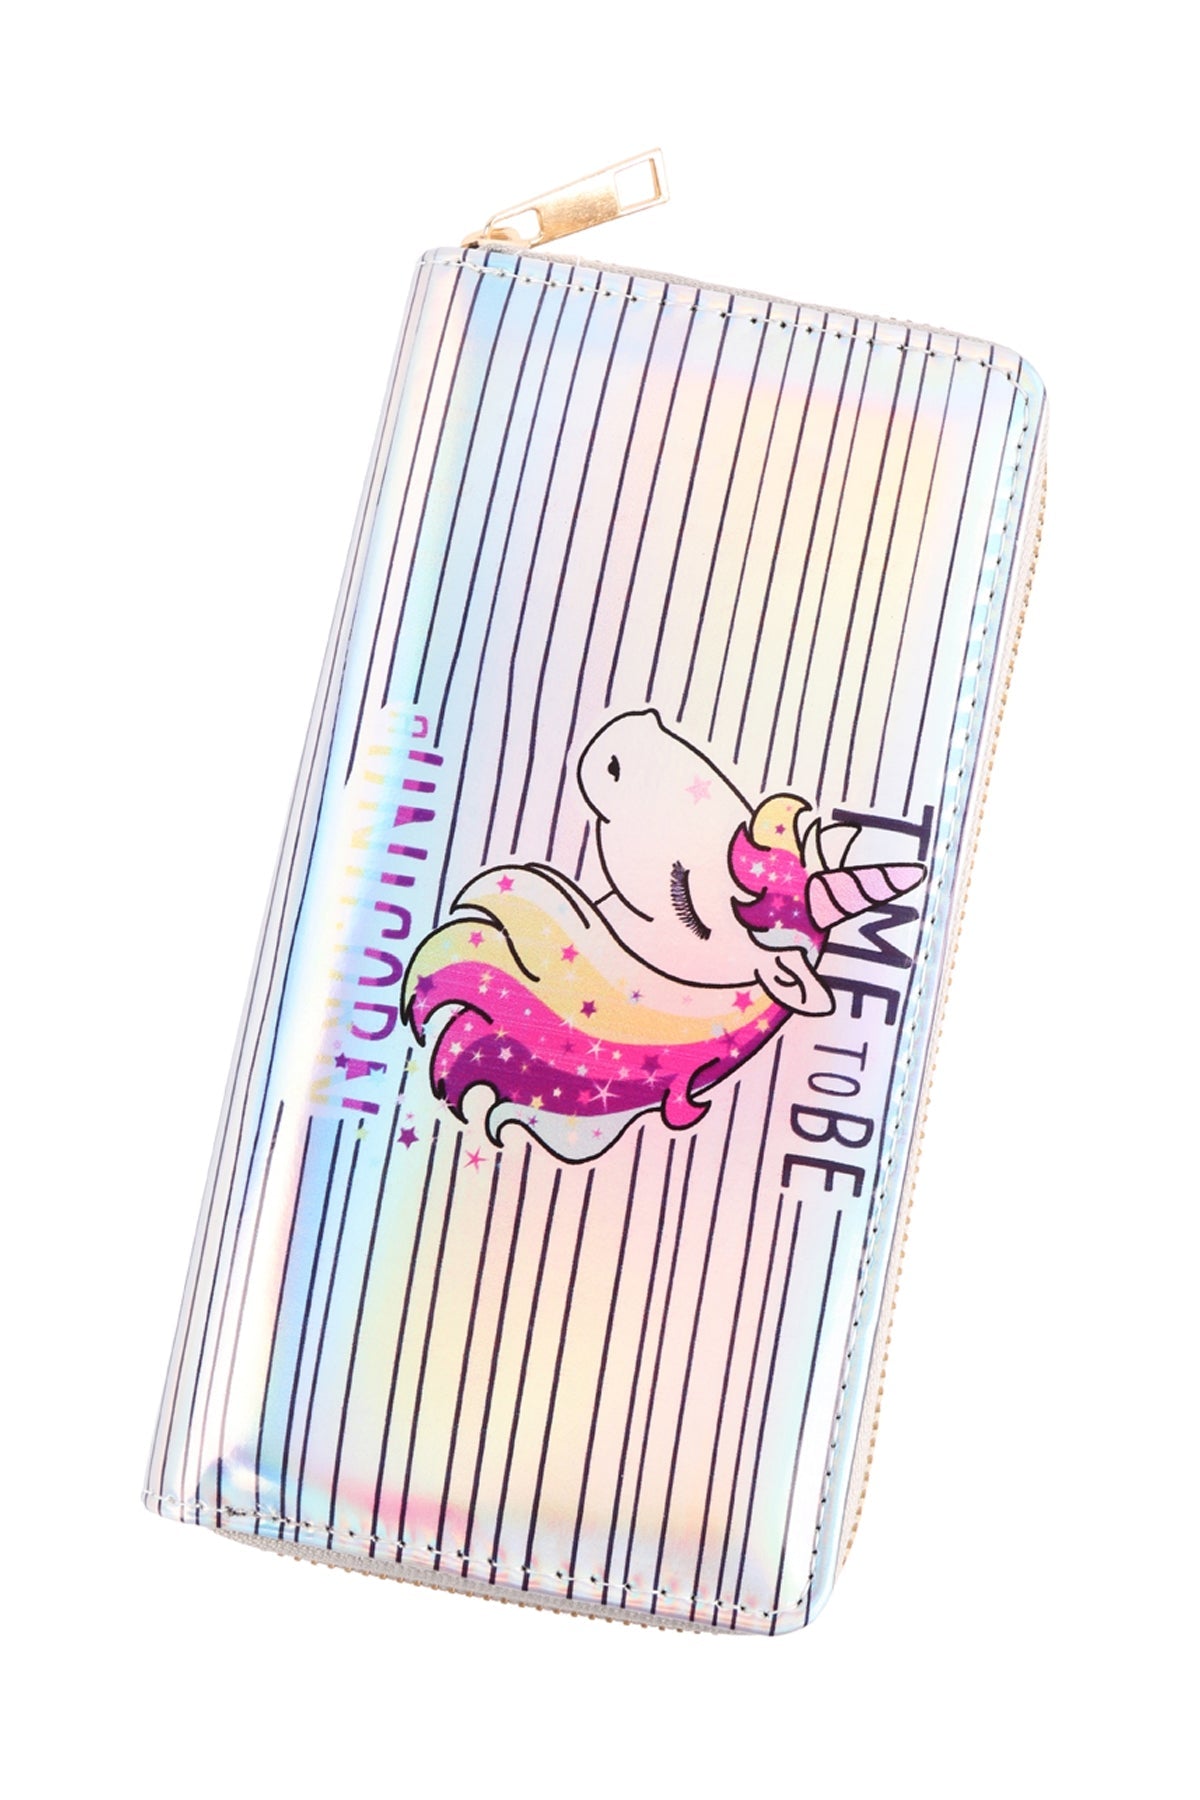 UNICORN HOLOGRAPIC SINGLE ZIPPER WALLET (NOW $2.25 ONLY!)